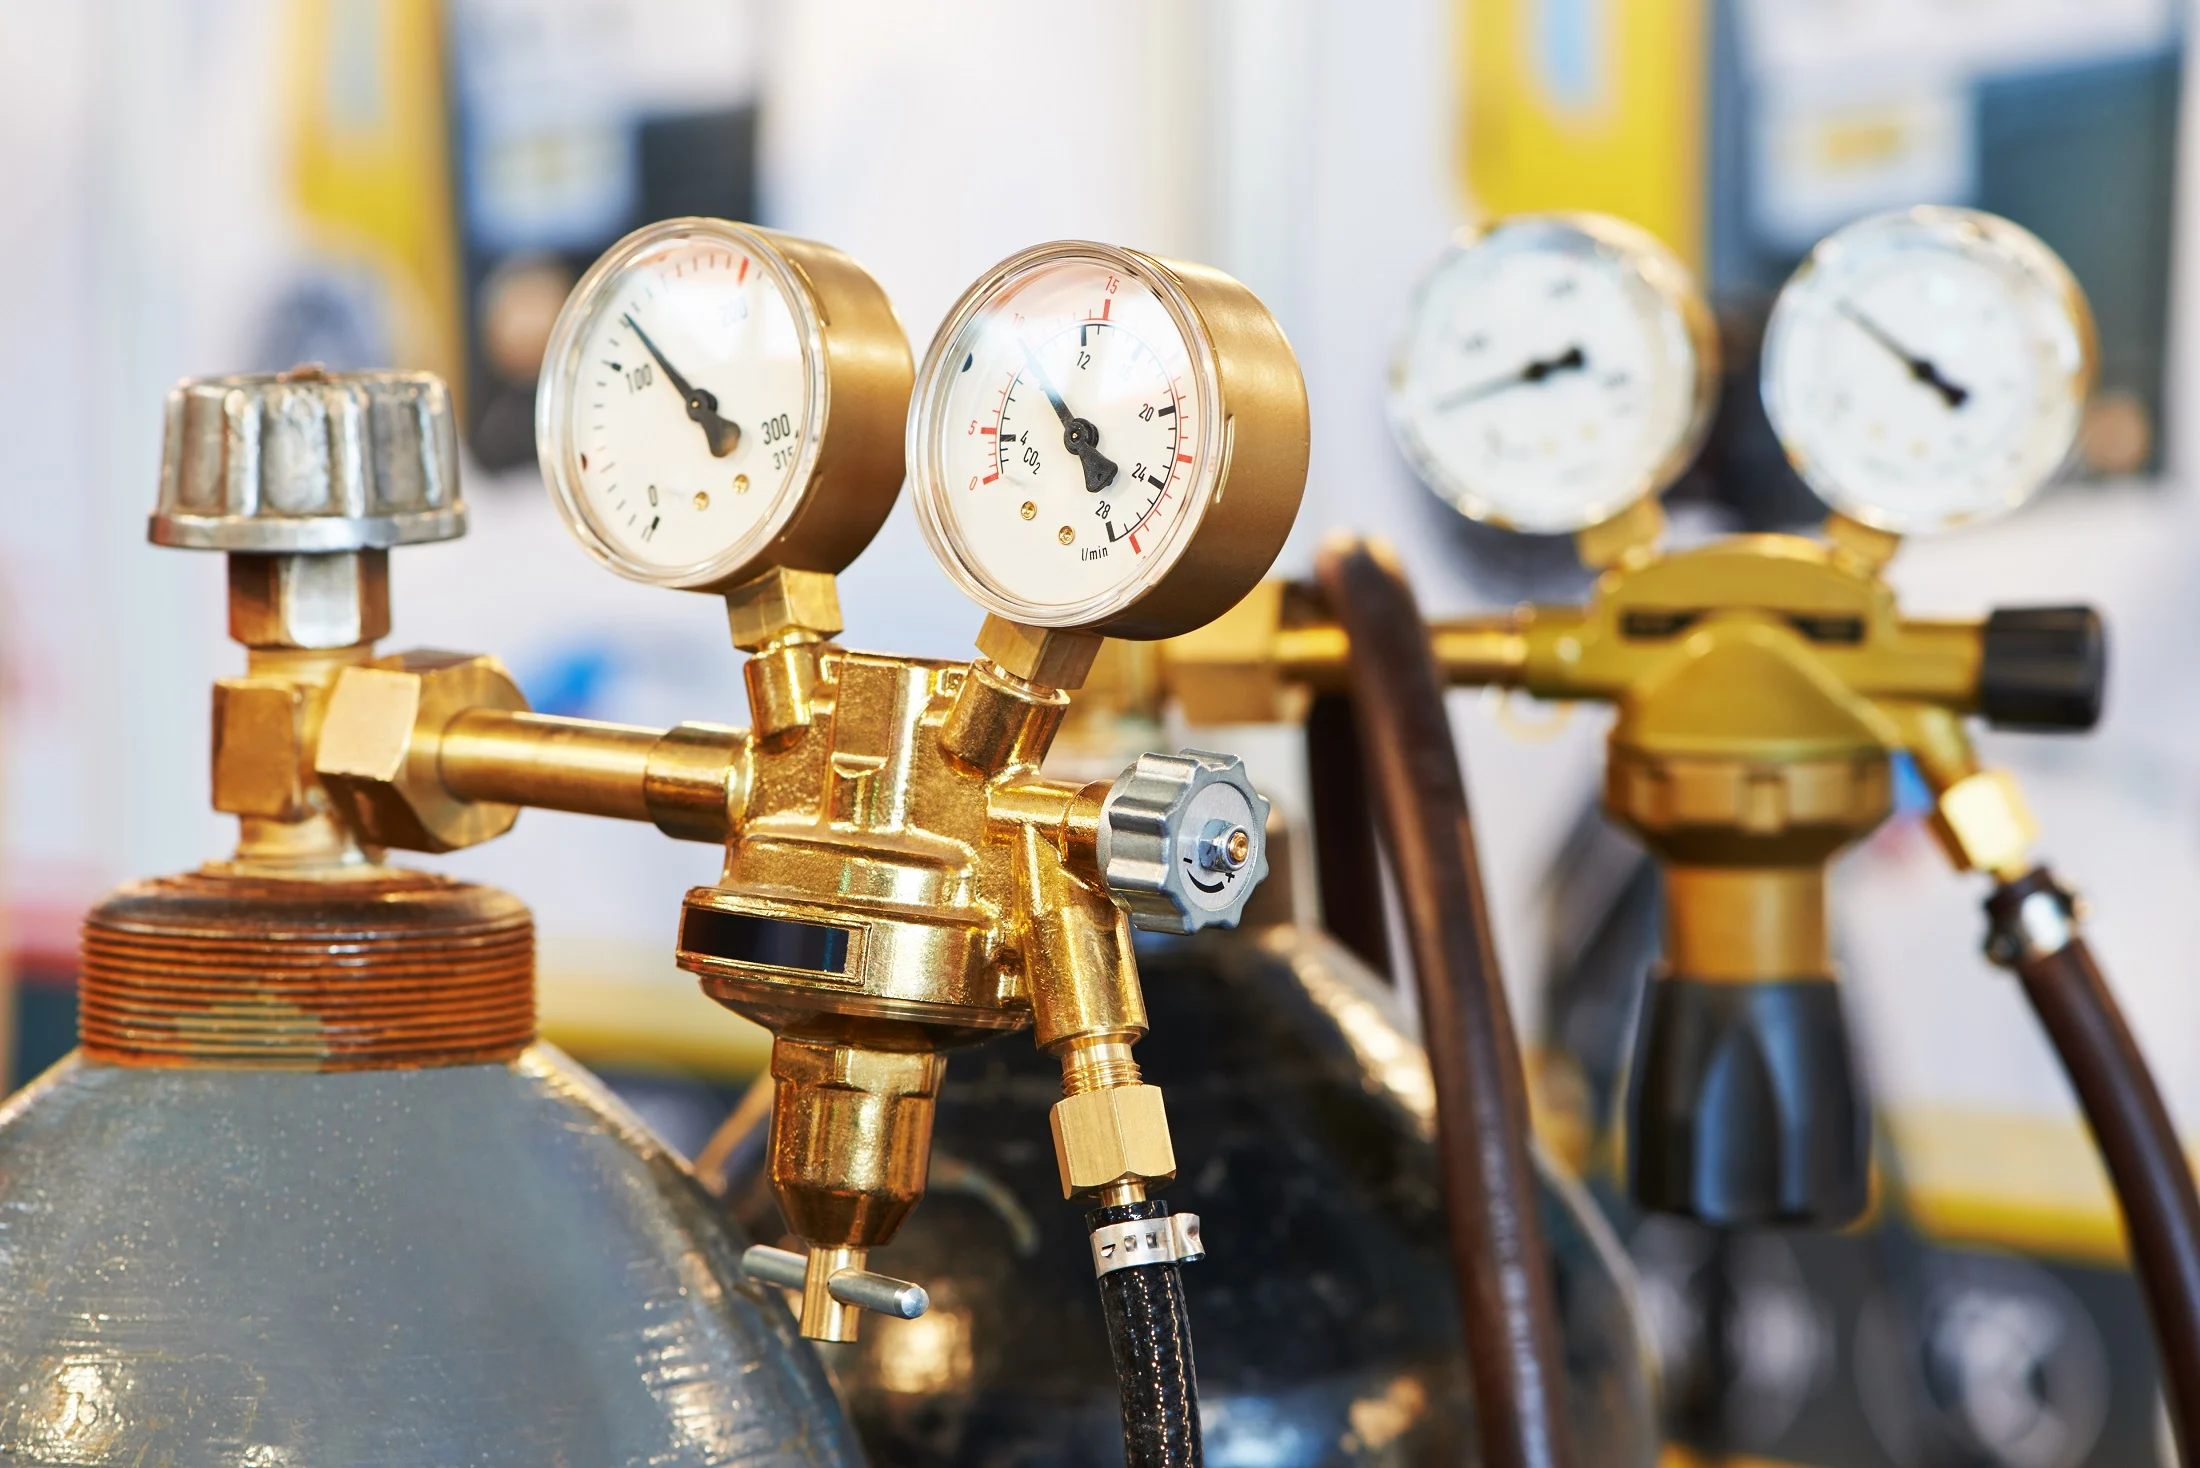 How to Handle and Store Acetylene Gas Safely Best Practices and Regulations